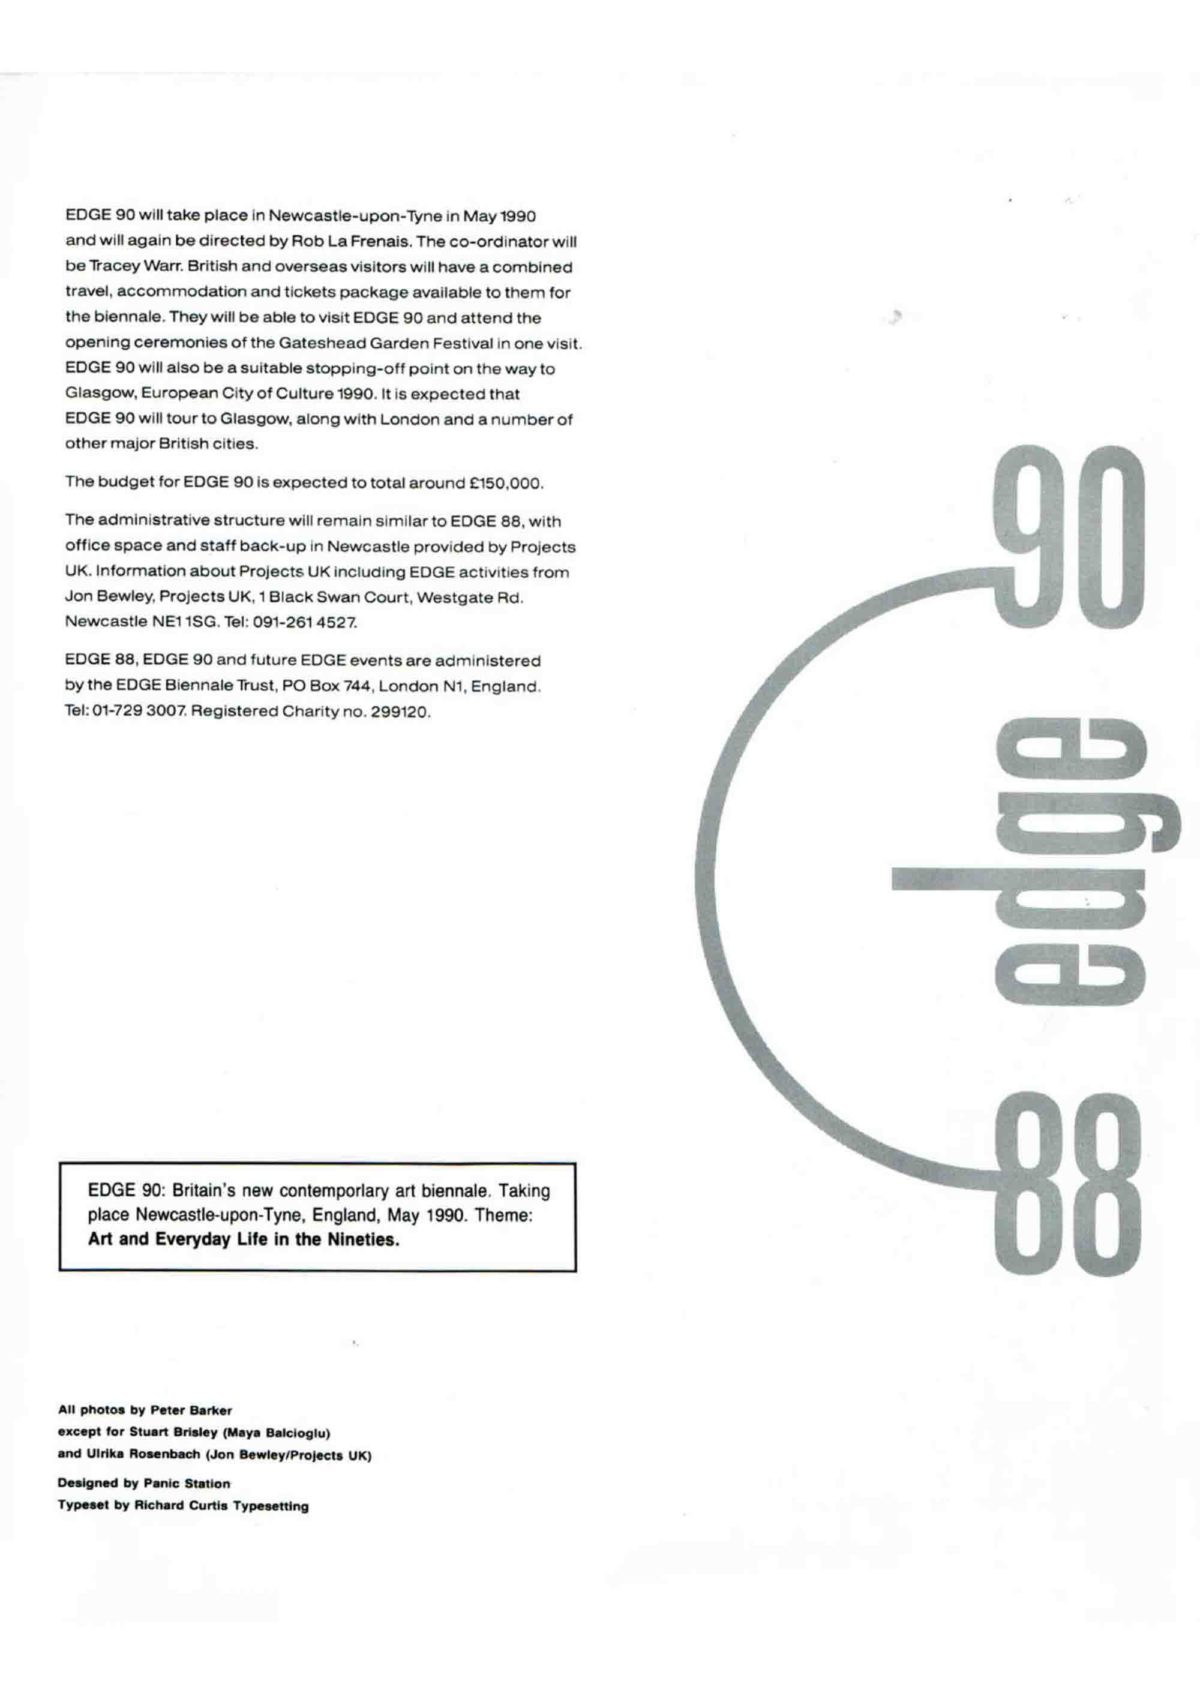 EDGE 88-99 Booklet, 1988 (Page 10 of 11)